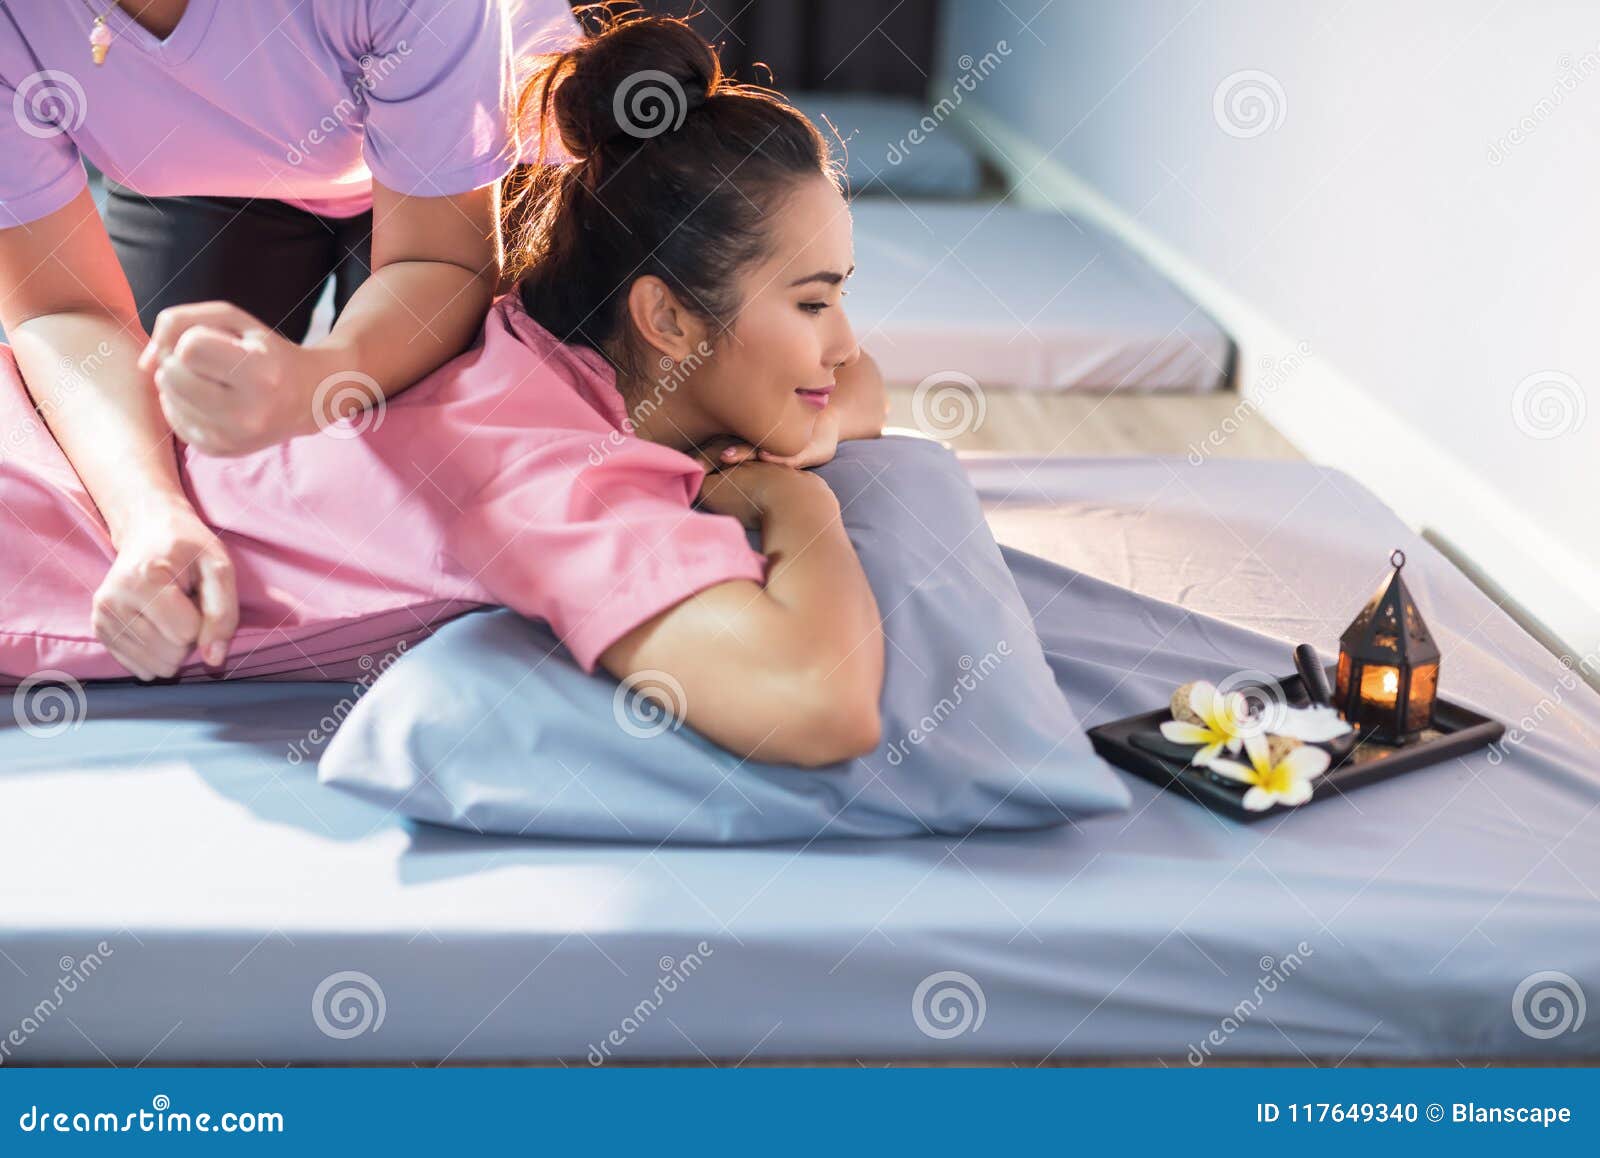 Thai Massage At Asian Girl Back Stock Photo Image Of Beauty Cos